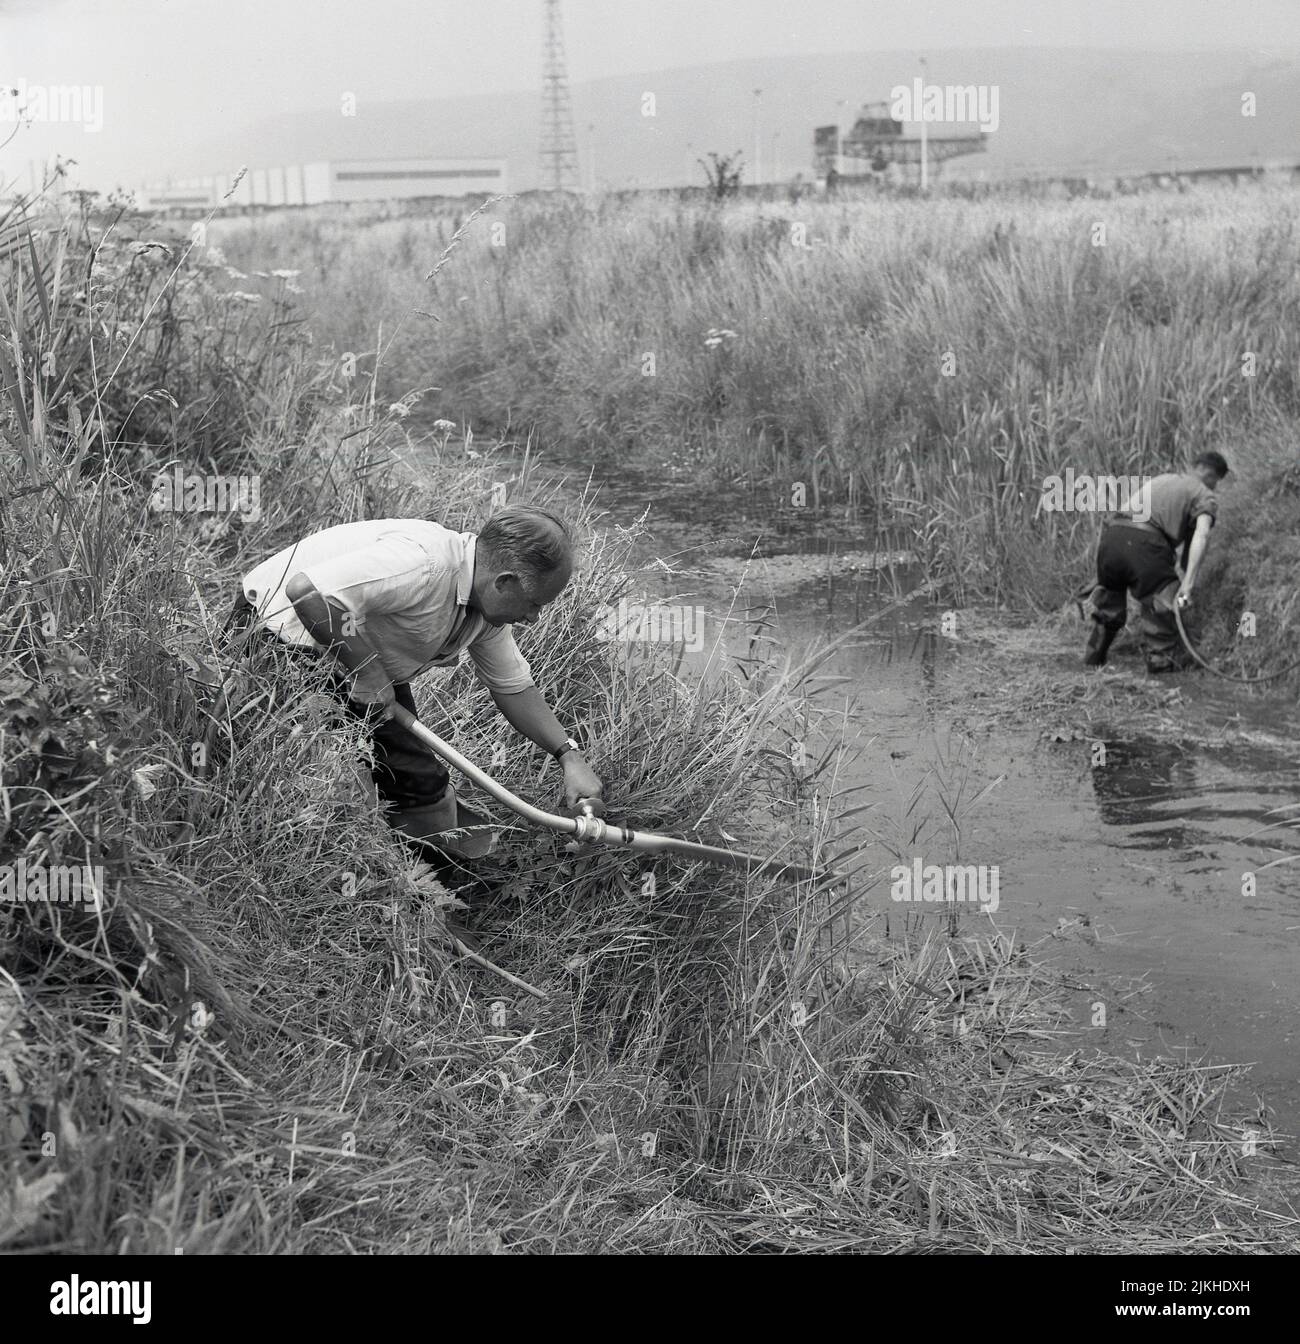 1950s, historical, two workers using hand-held suction apparatus to dredge the bottom of a small river near an industrial site, Port Talbot, Wales, UK. Dredging is a term used for cleaning the bed of a river of mud, silt and other materials, for various reasons, one of which is to improve the flow of water. Stock Photo